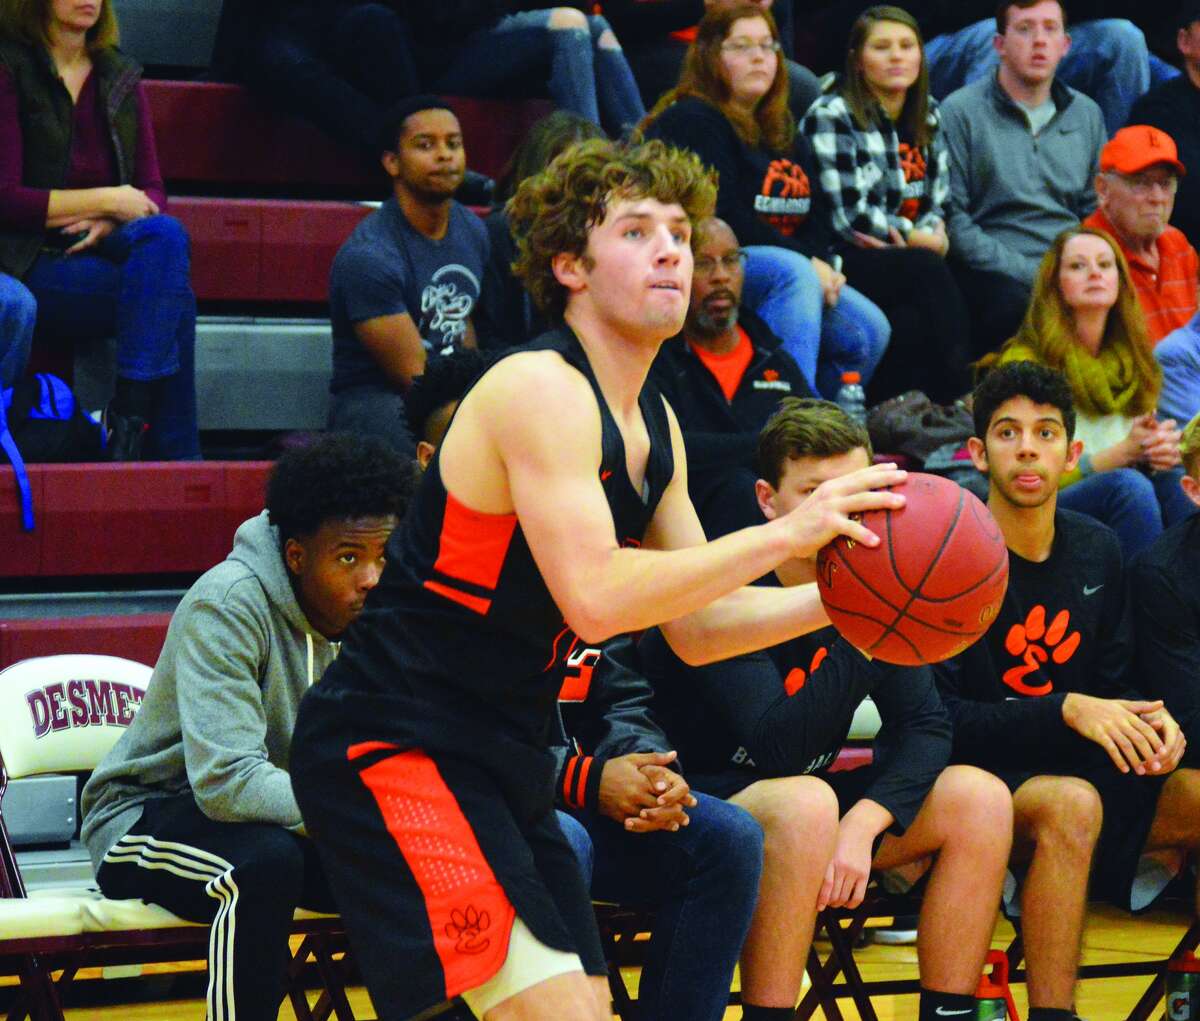 Edwardsville senior guard Jack Marinko lines up a 3-point attempt during the third quarter of Tuesday’s season-opening game at De Smet in St. Louis.